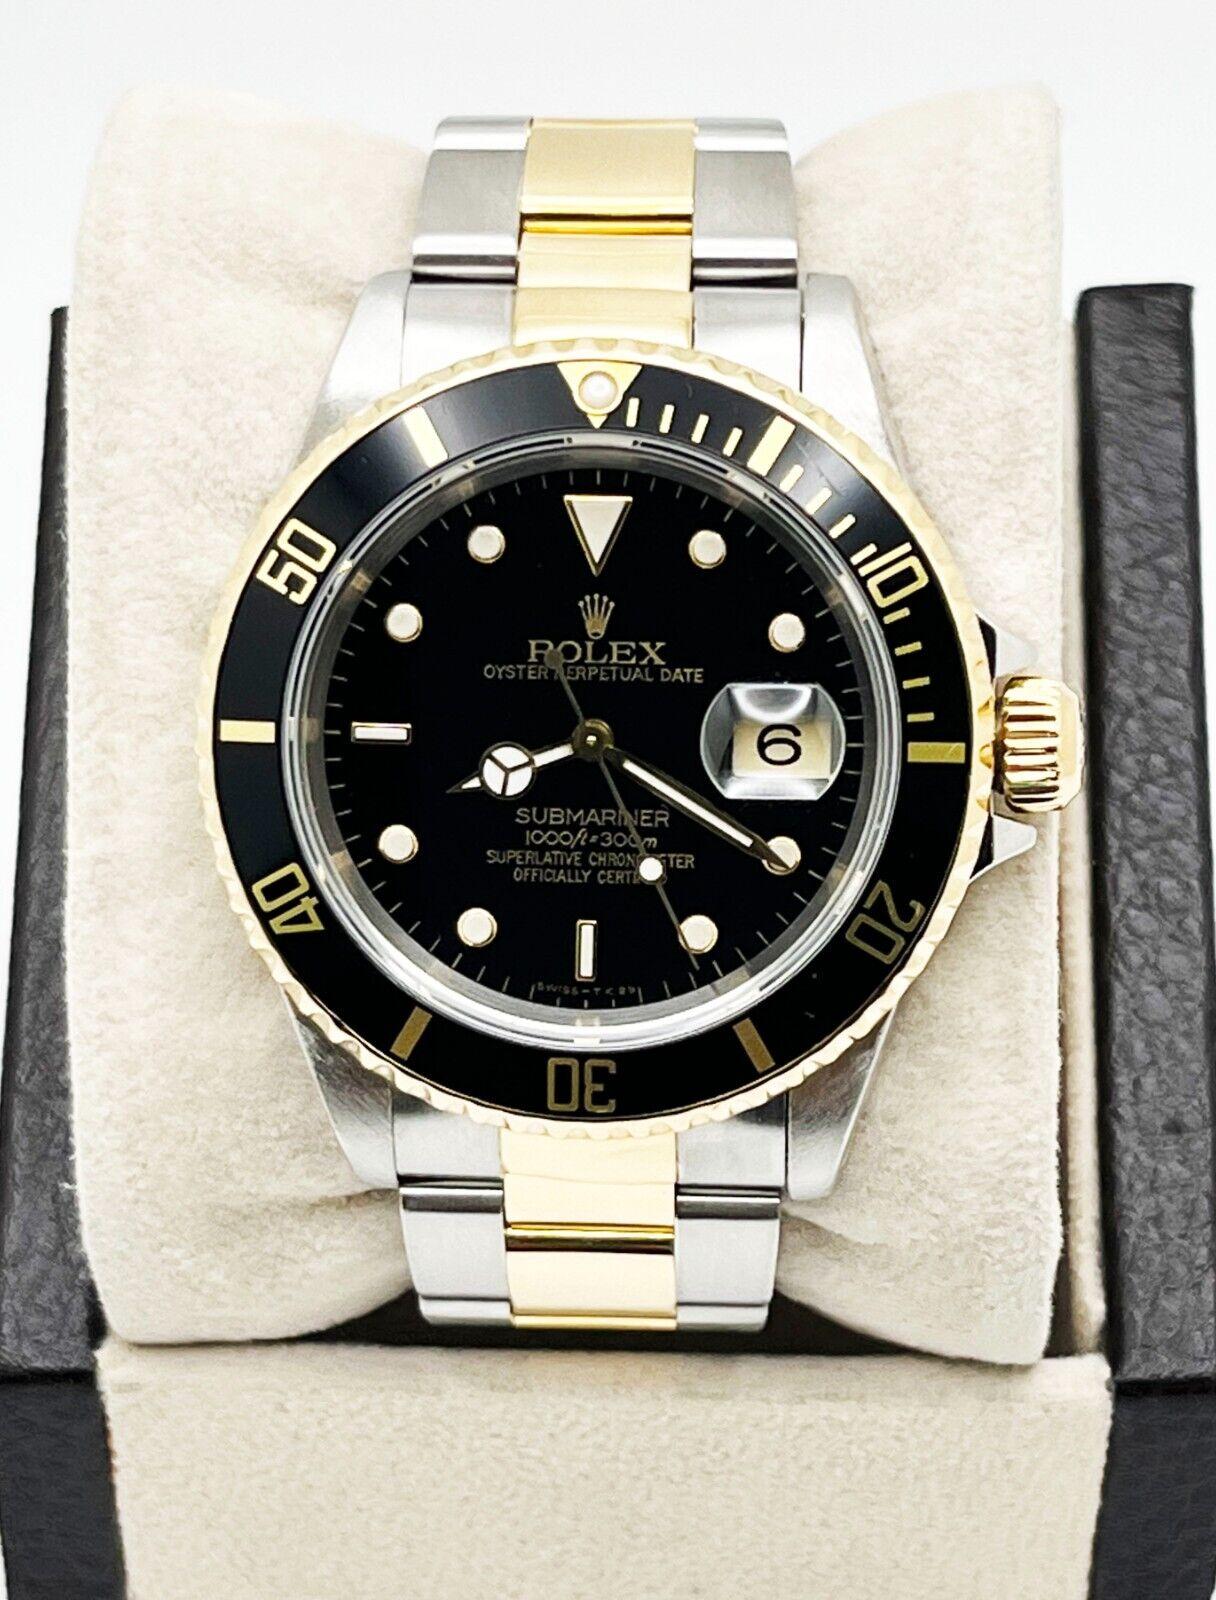 Style Number: 16613



Serial: T981***



Year: 1995

 

Model: Submariner

 

Case Material: Stainless Steel

 

Band: 18K Yellow Gold & Stainless Steel 

  

Bezel: Black

 

Dial: Black

 

Face: Sapphire Crystal

 

Case Size: 40mm

 

Includes: